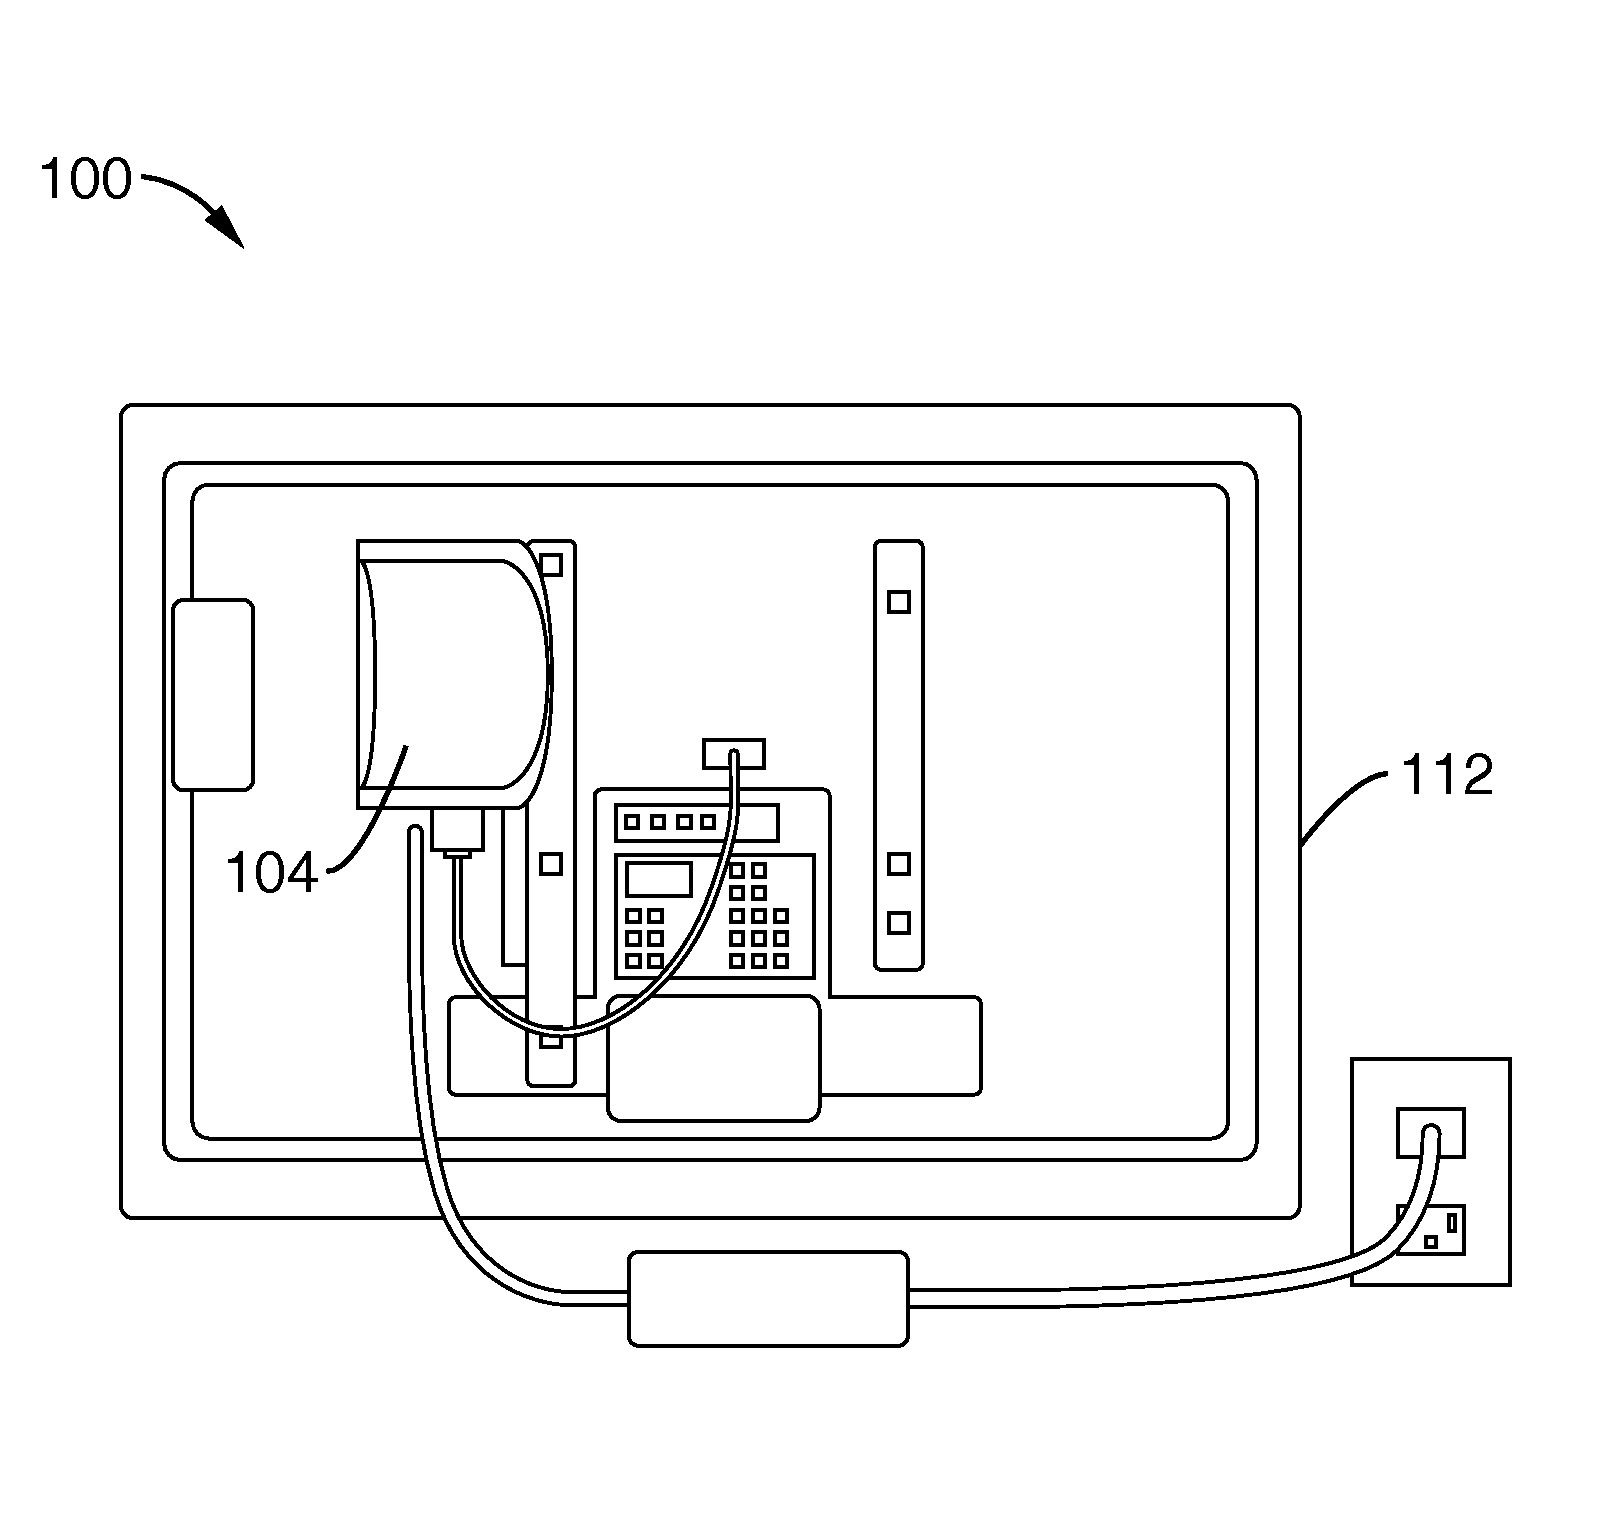 Automatically reconfigurable multimedia system with interchangeable personality adapters